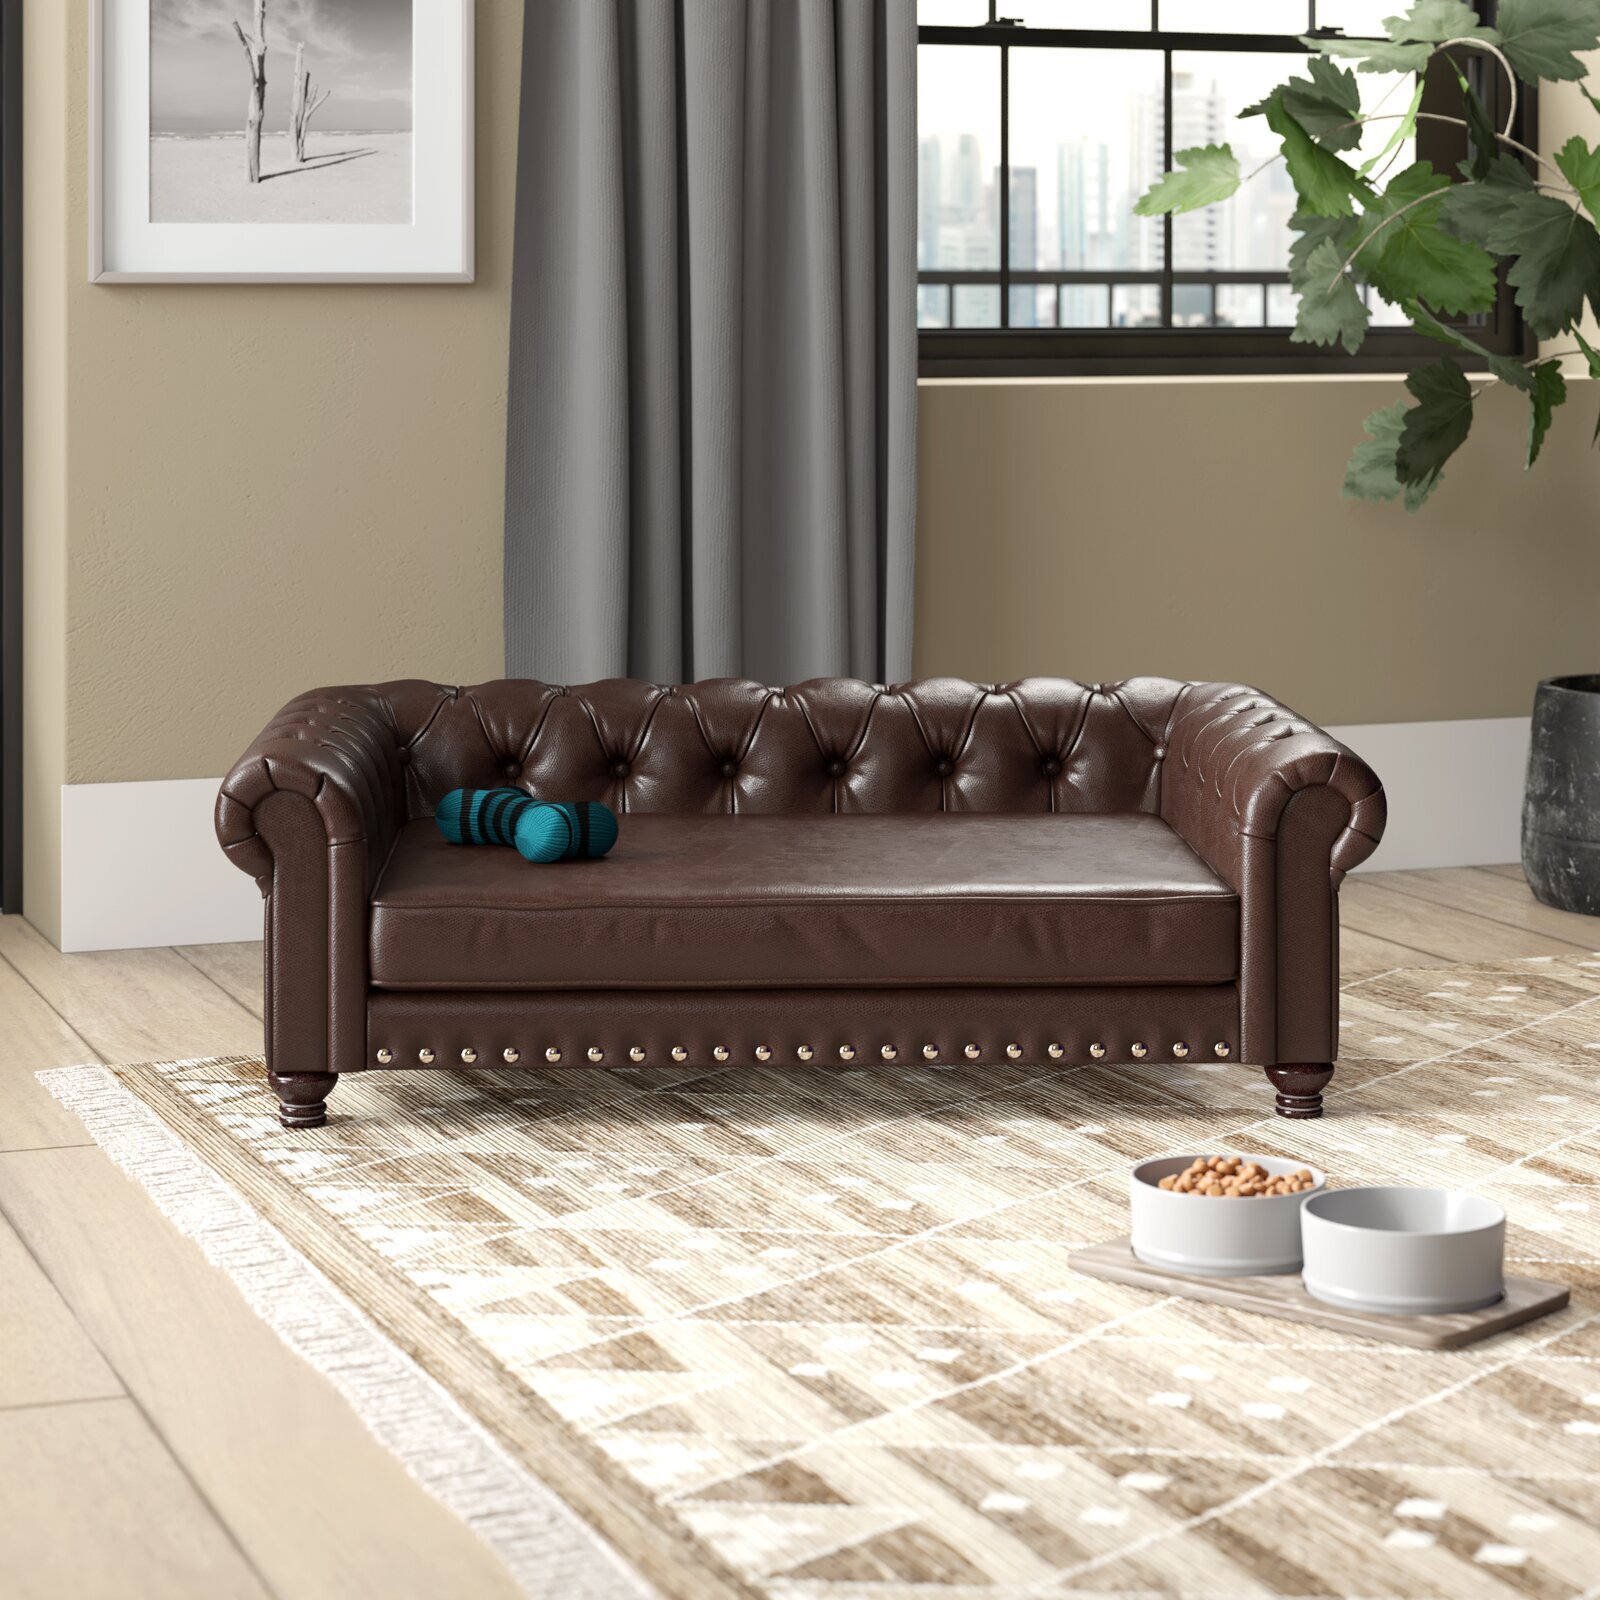 Chesterfield Dog Couch